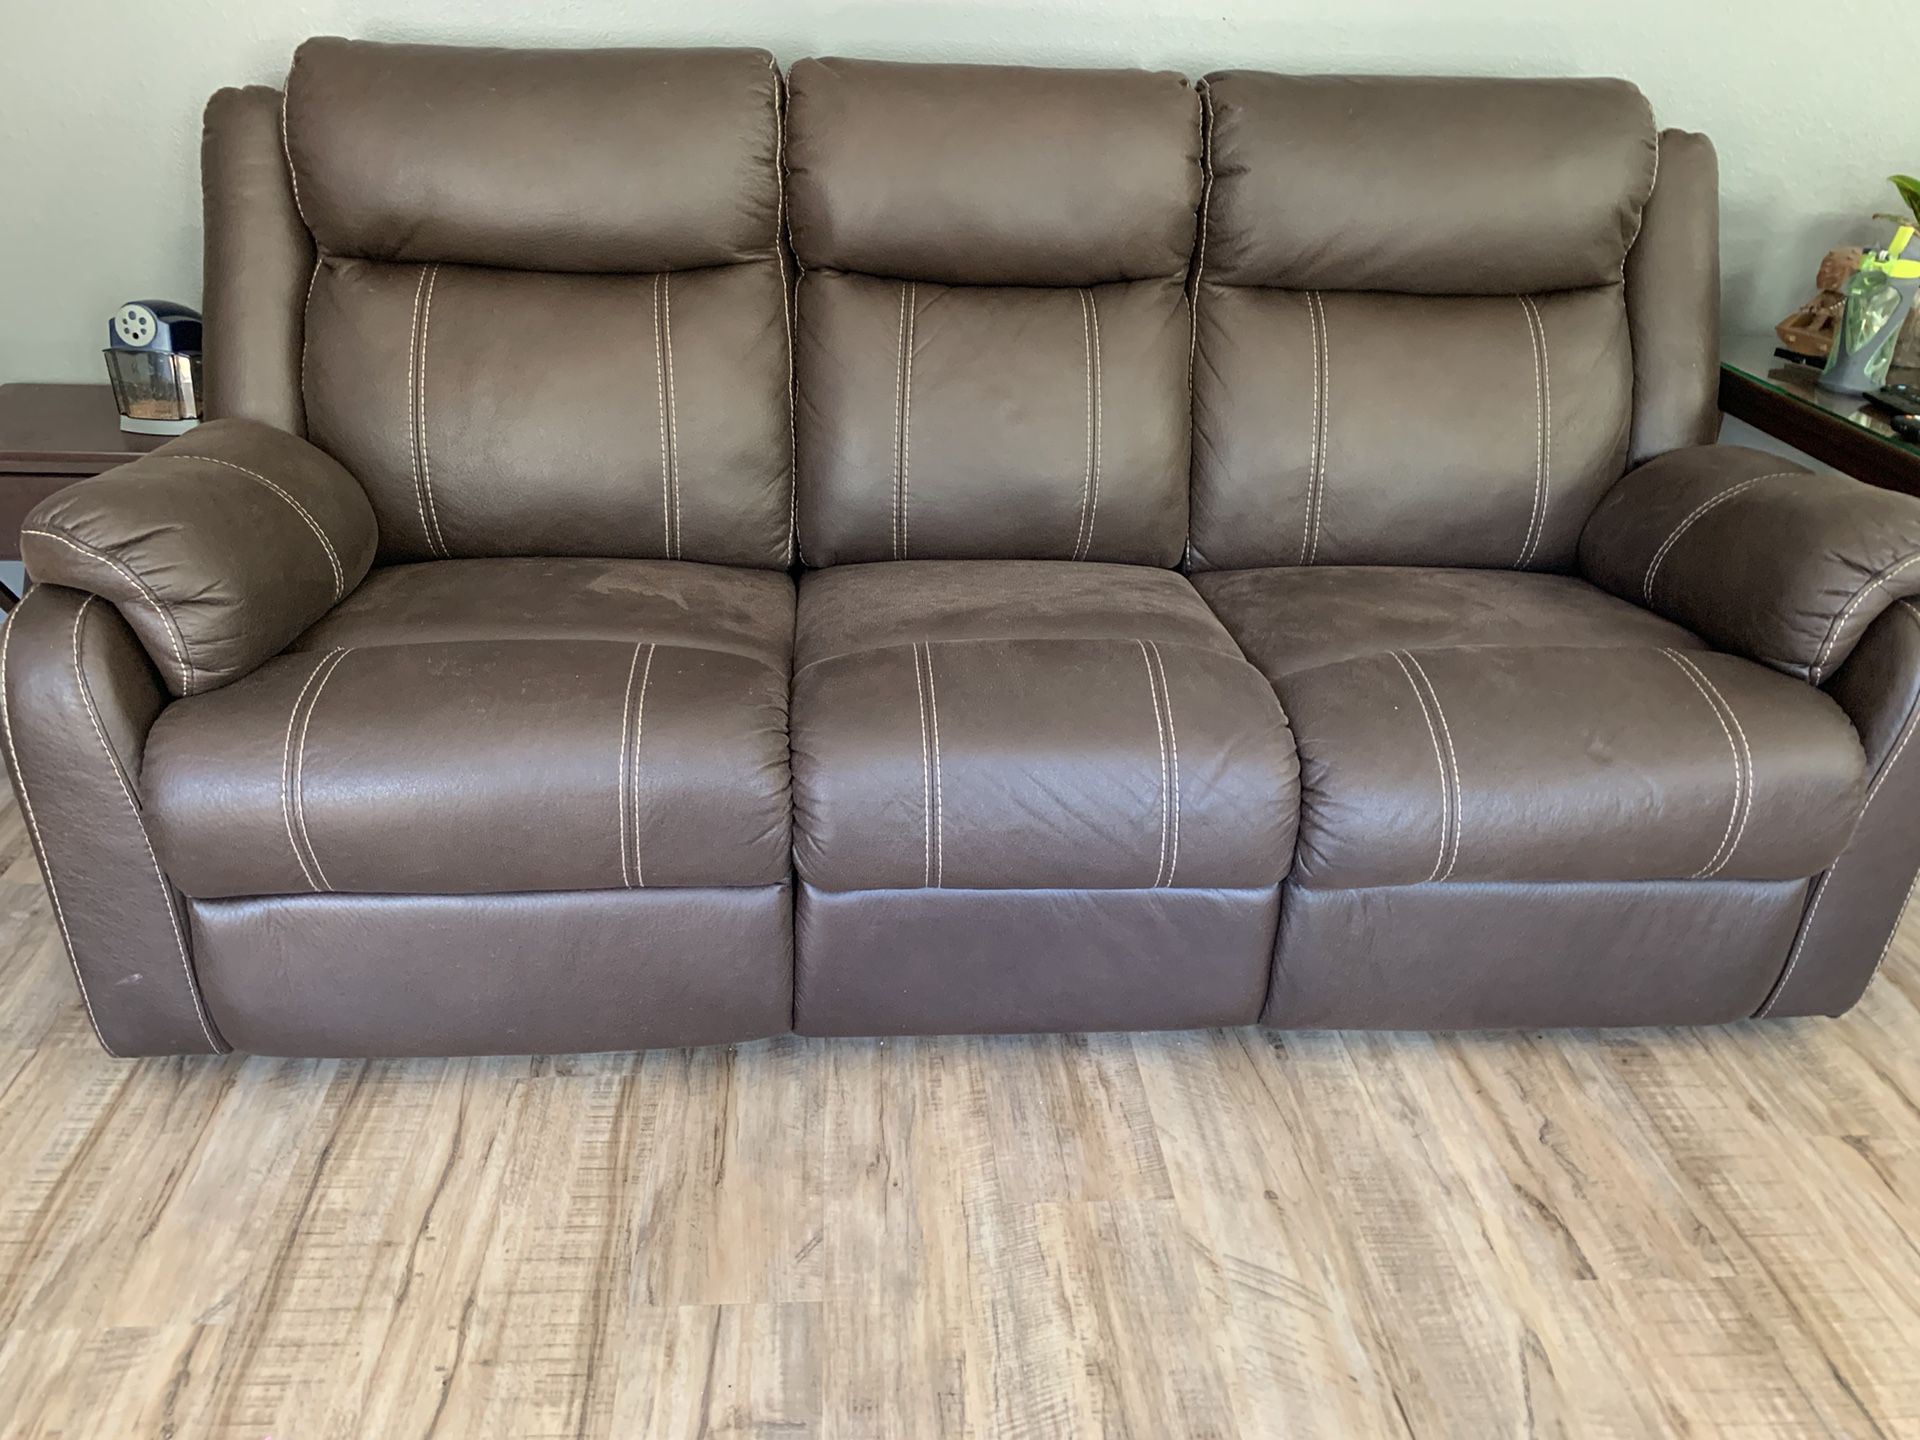 Reclining Sofa And Love Seat